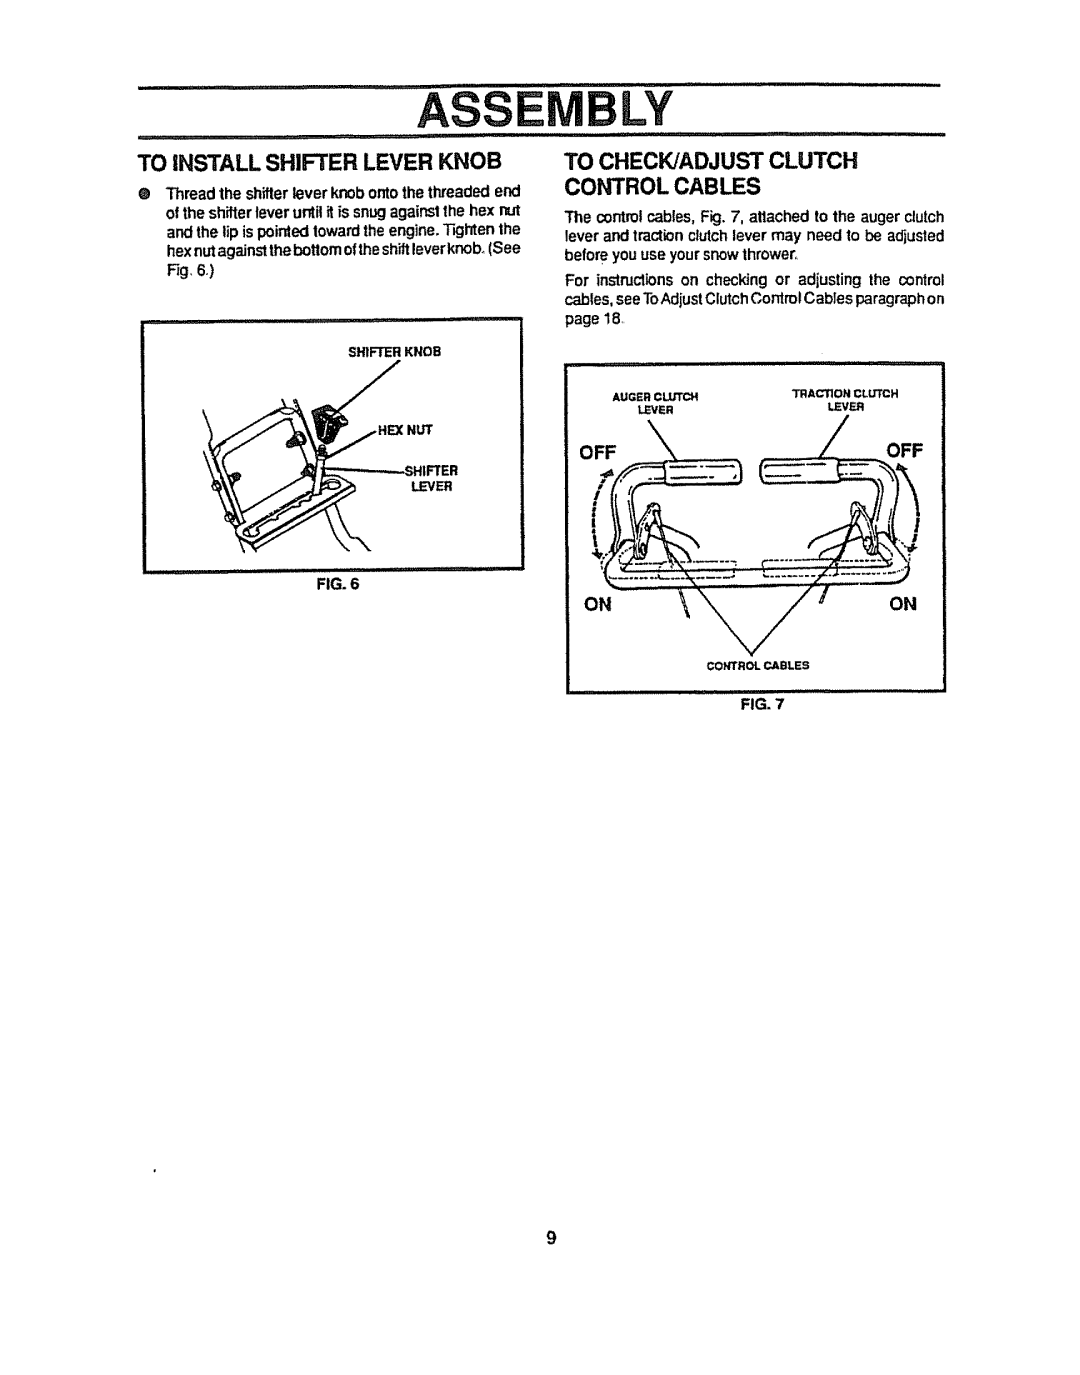 Sears 536.884821 manual TO iNSTALL SHIFTER LEVER KNOB, To Checkjadjust Clutch Control Cables, Onon, F,G7 